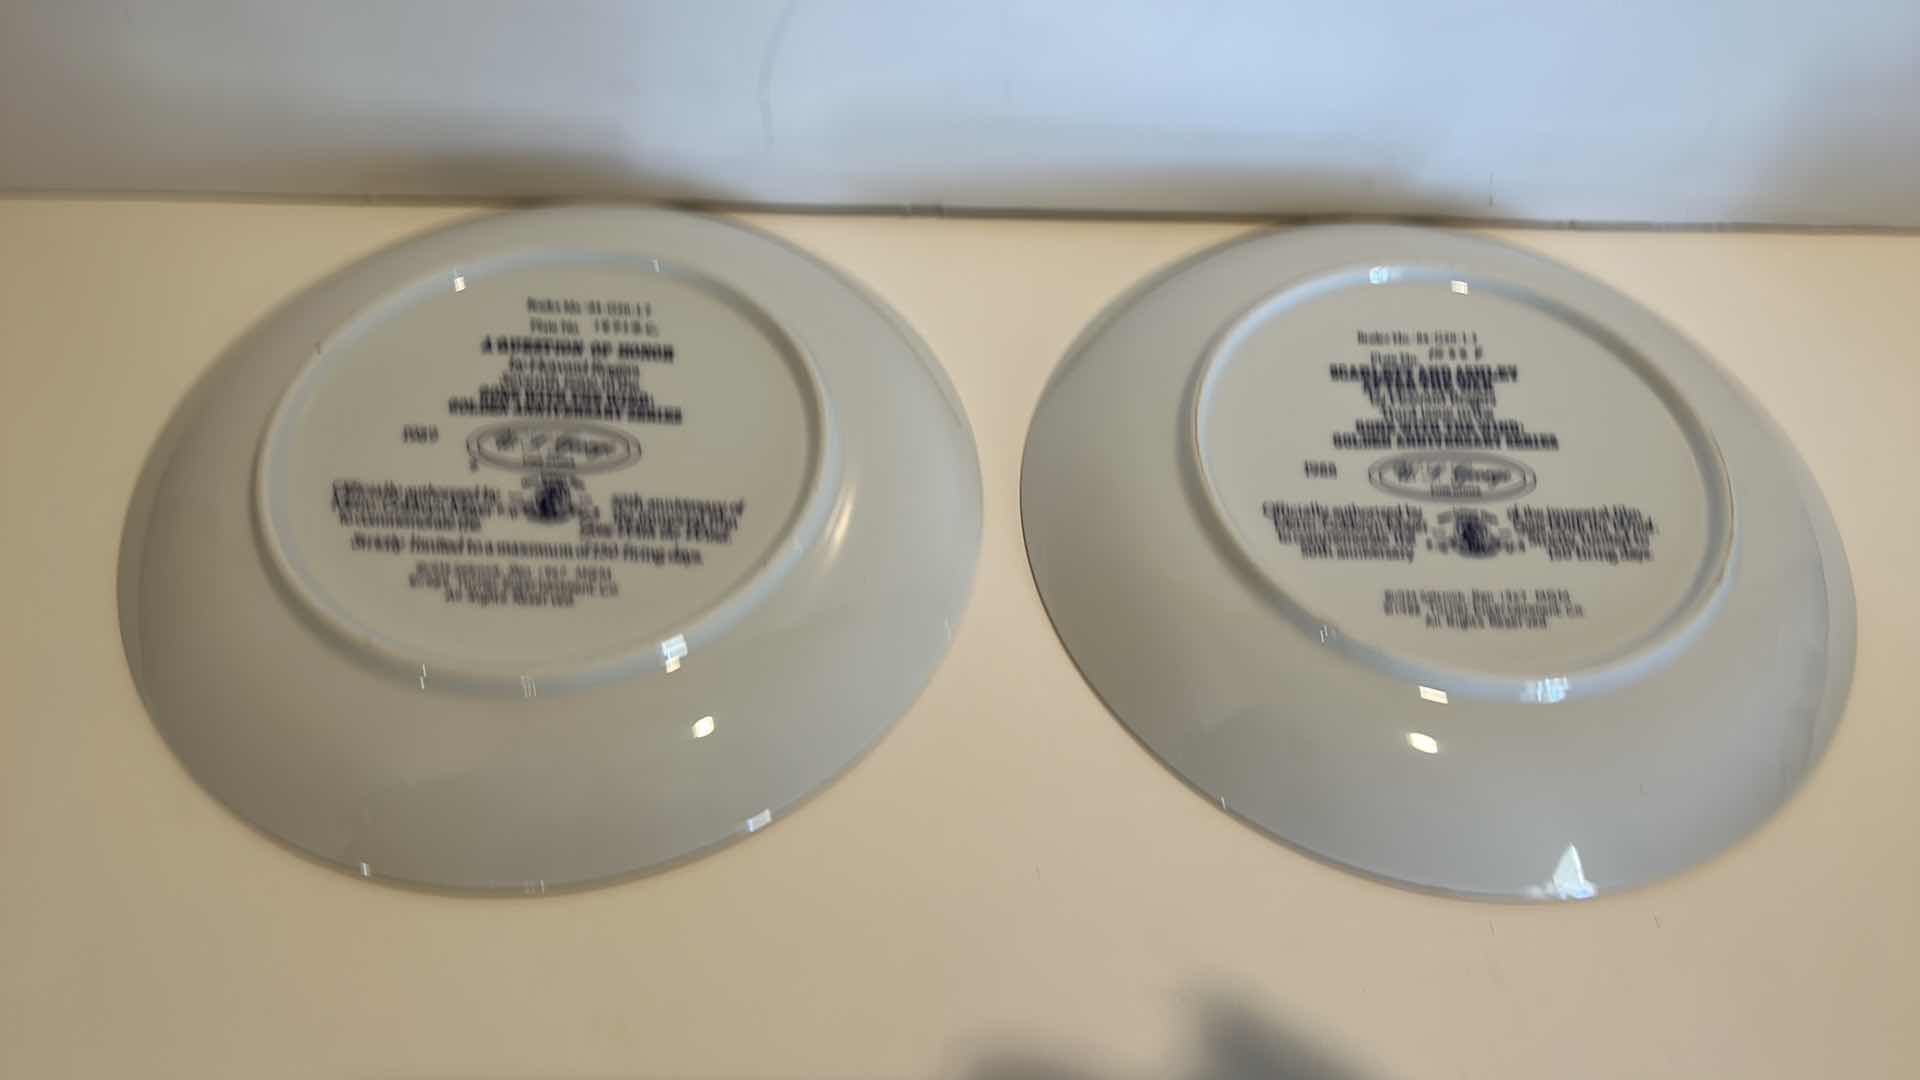 Photo 2 of 2 - COLLECTIBLE FINE CHINA “GONE WITH THE WIND” GOLDEN ANNIVERSARY SERIES BY W.L. GEORGE NUMBERED PLATES 8.5”